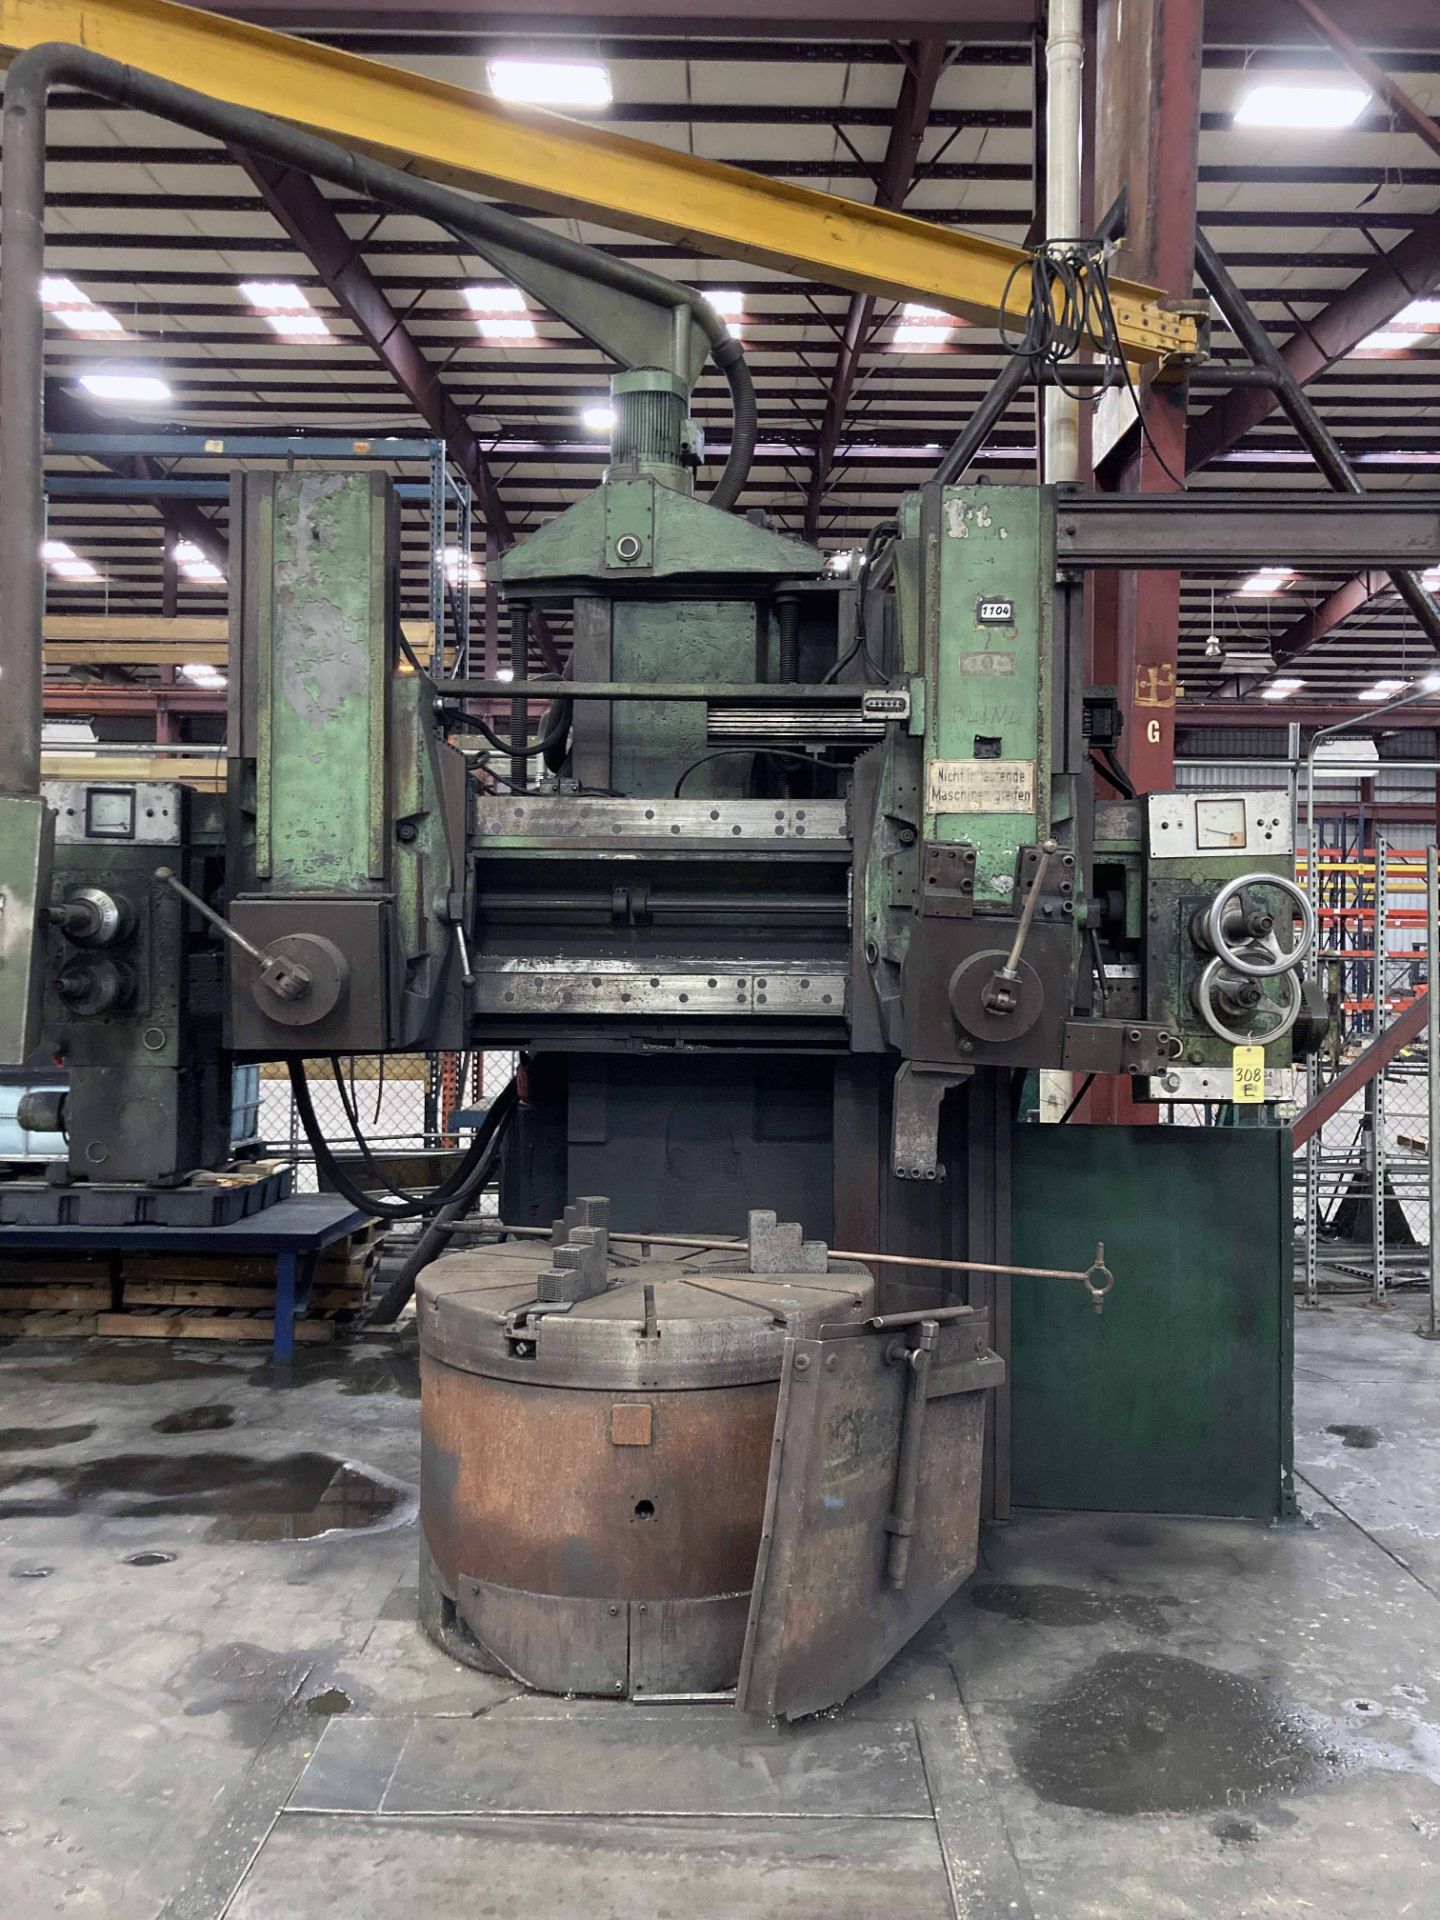 VERTICAL BORING MILL, FRORIEP 56", 3-jaw chuck, dbl. 4-sided turrets, pendant control (out of